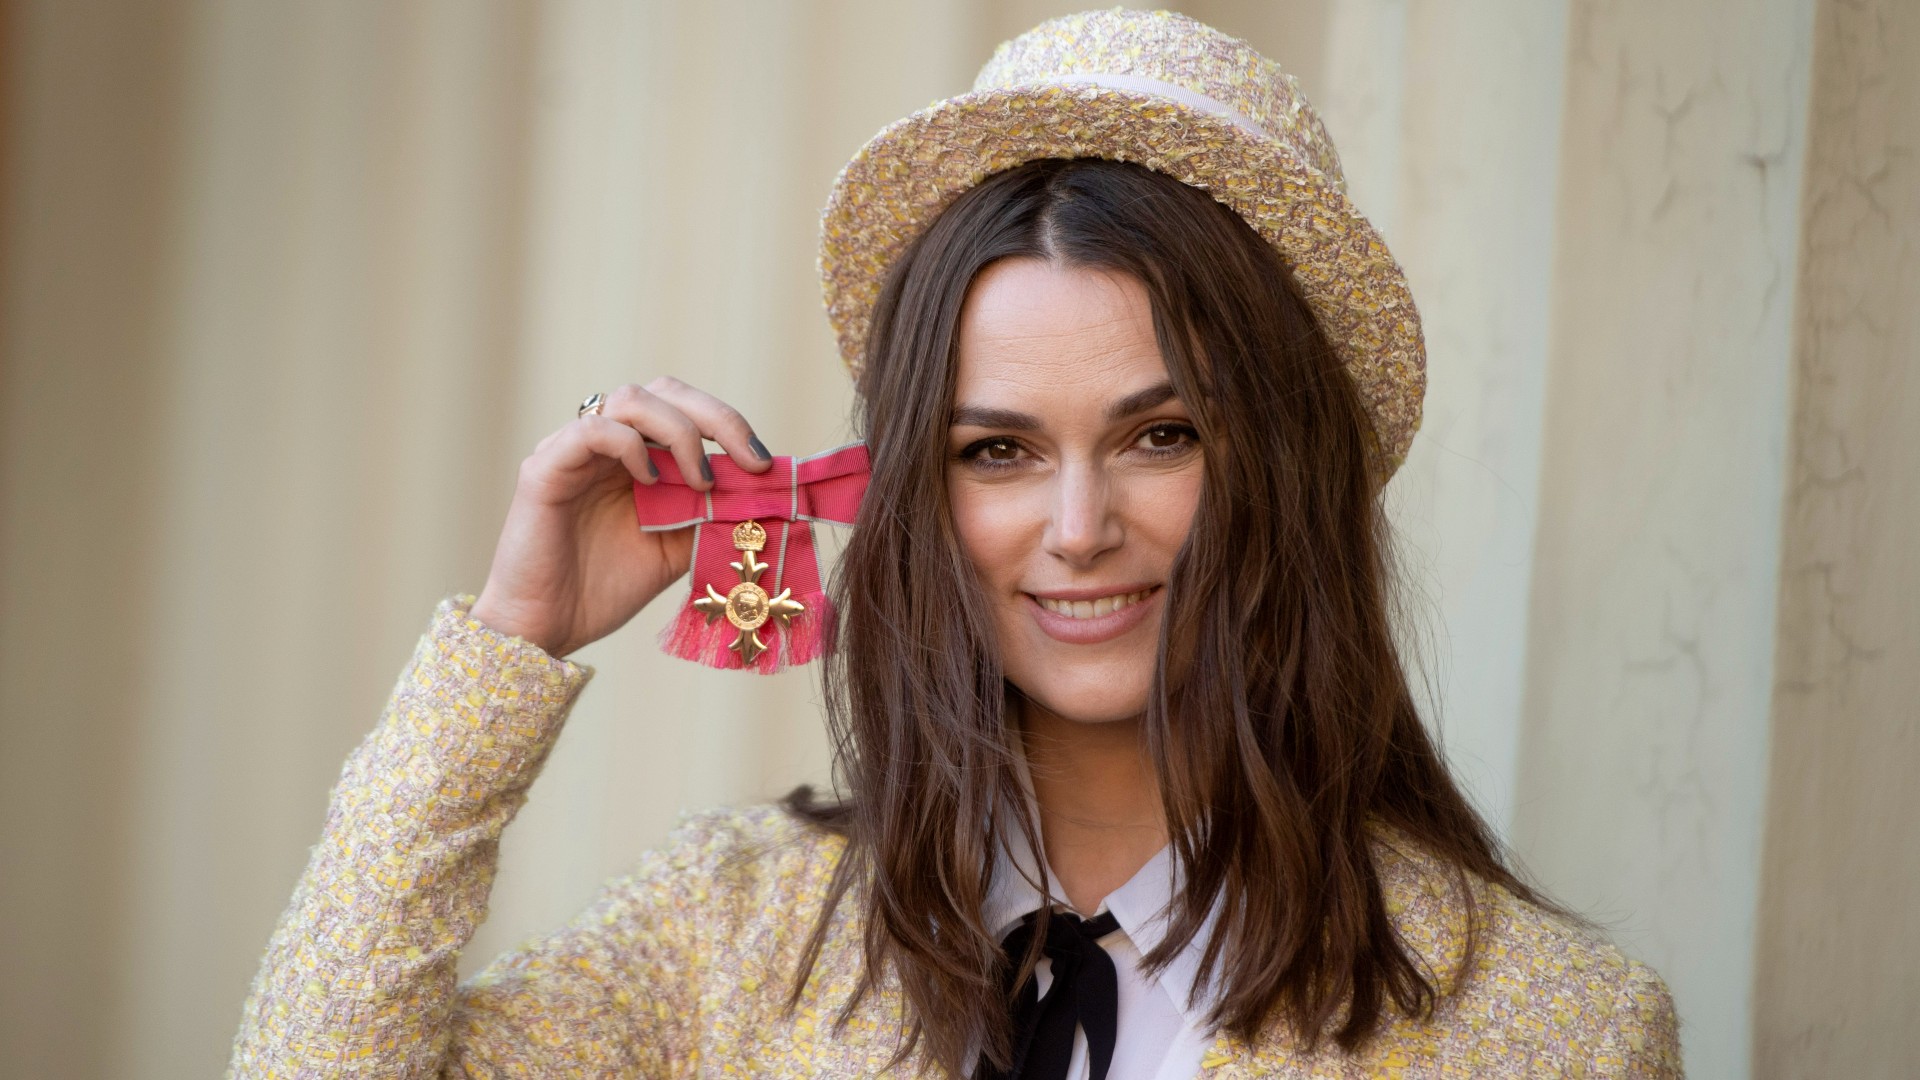 10 Things You Never Knew About Keira Knightley